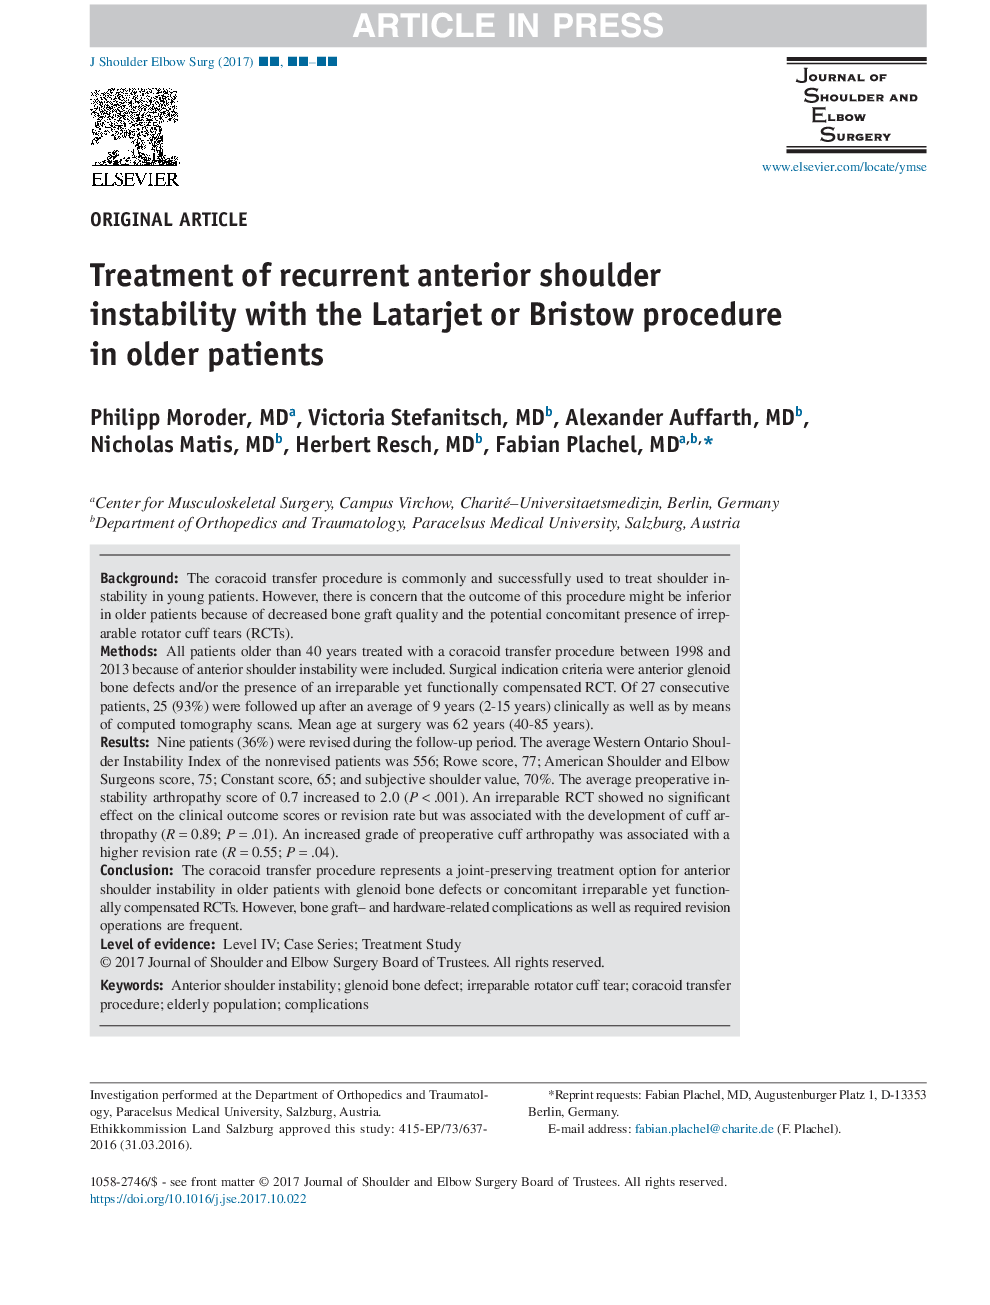 Treatment of recurrent anterior shoulder instability with the Latarjet or Bristow procedure in older patients